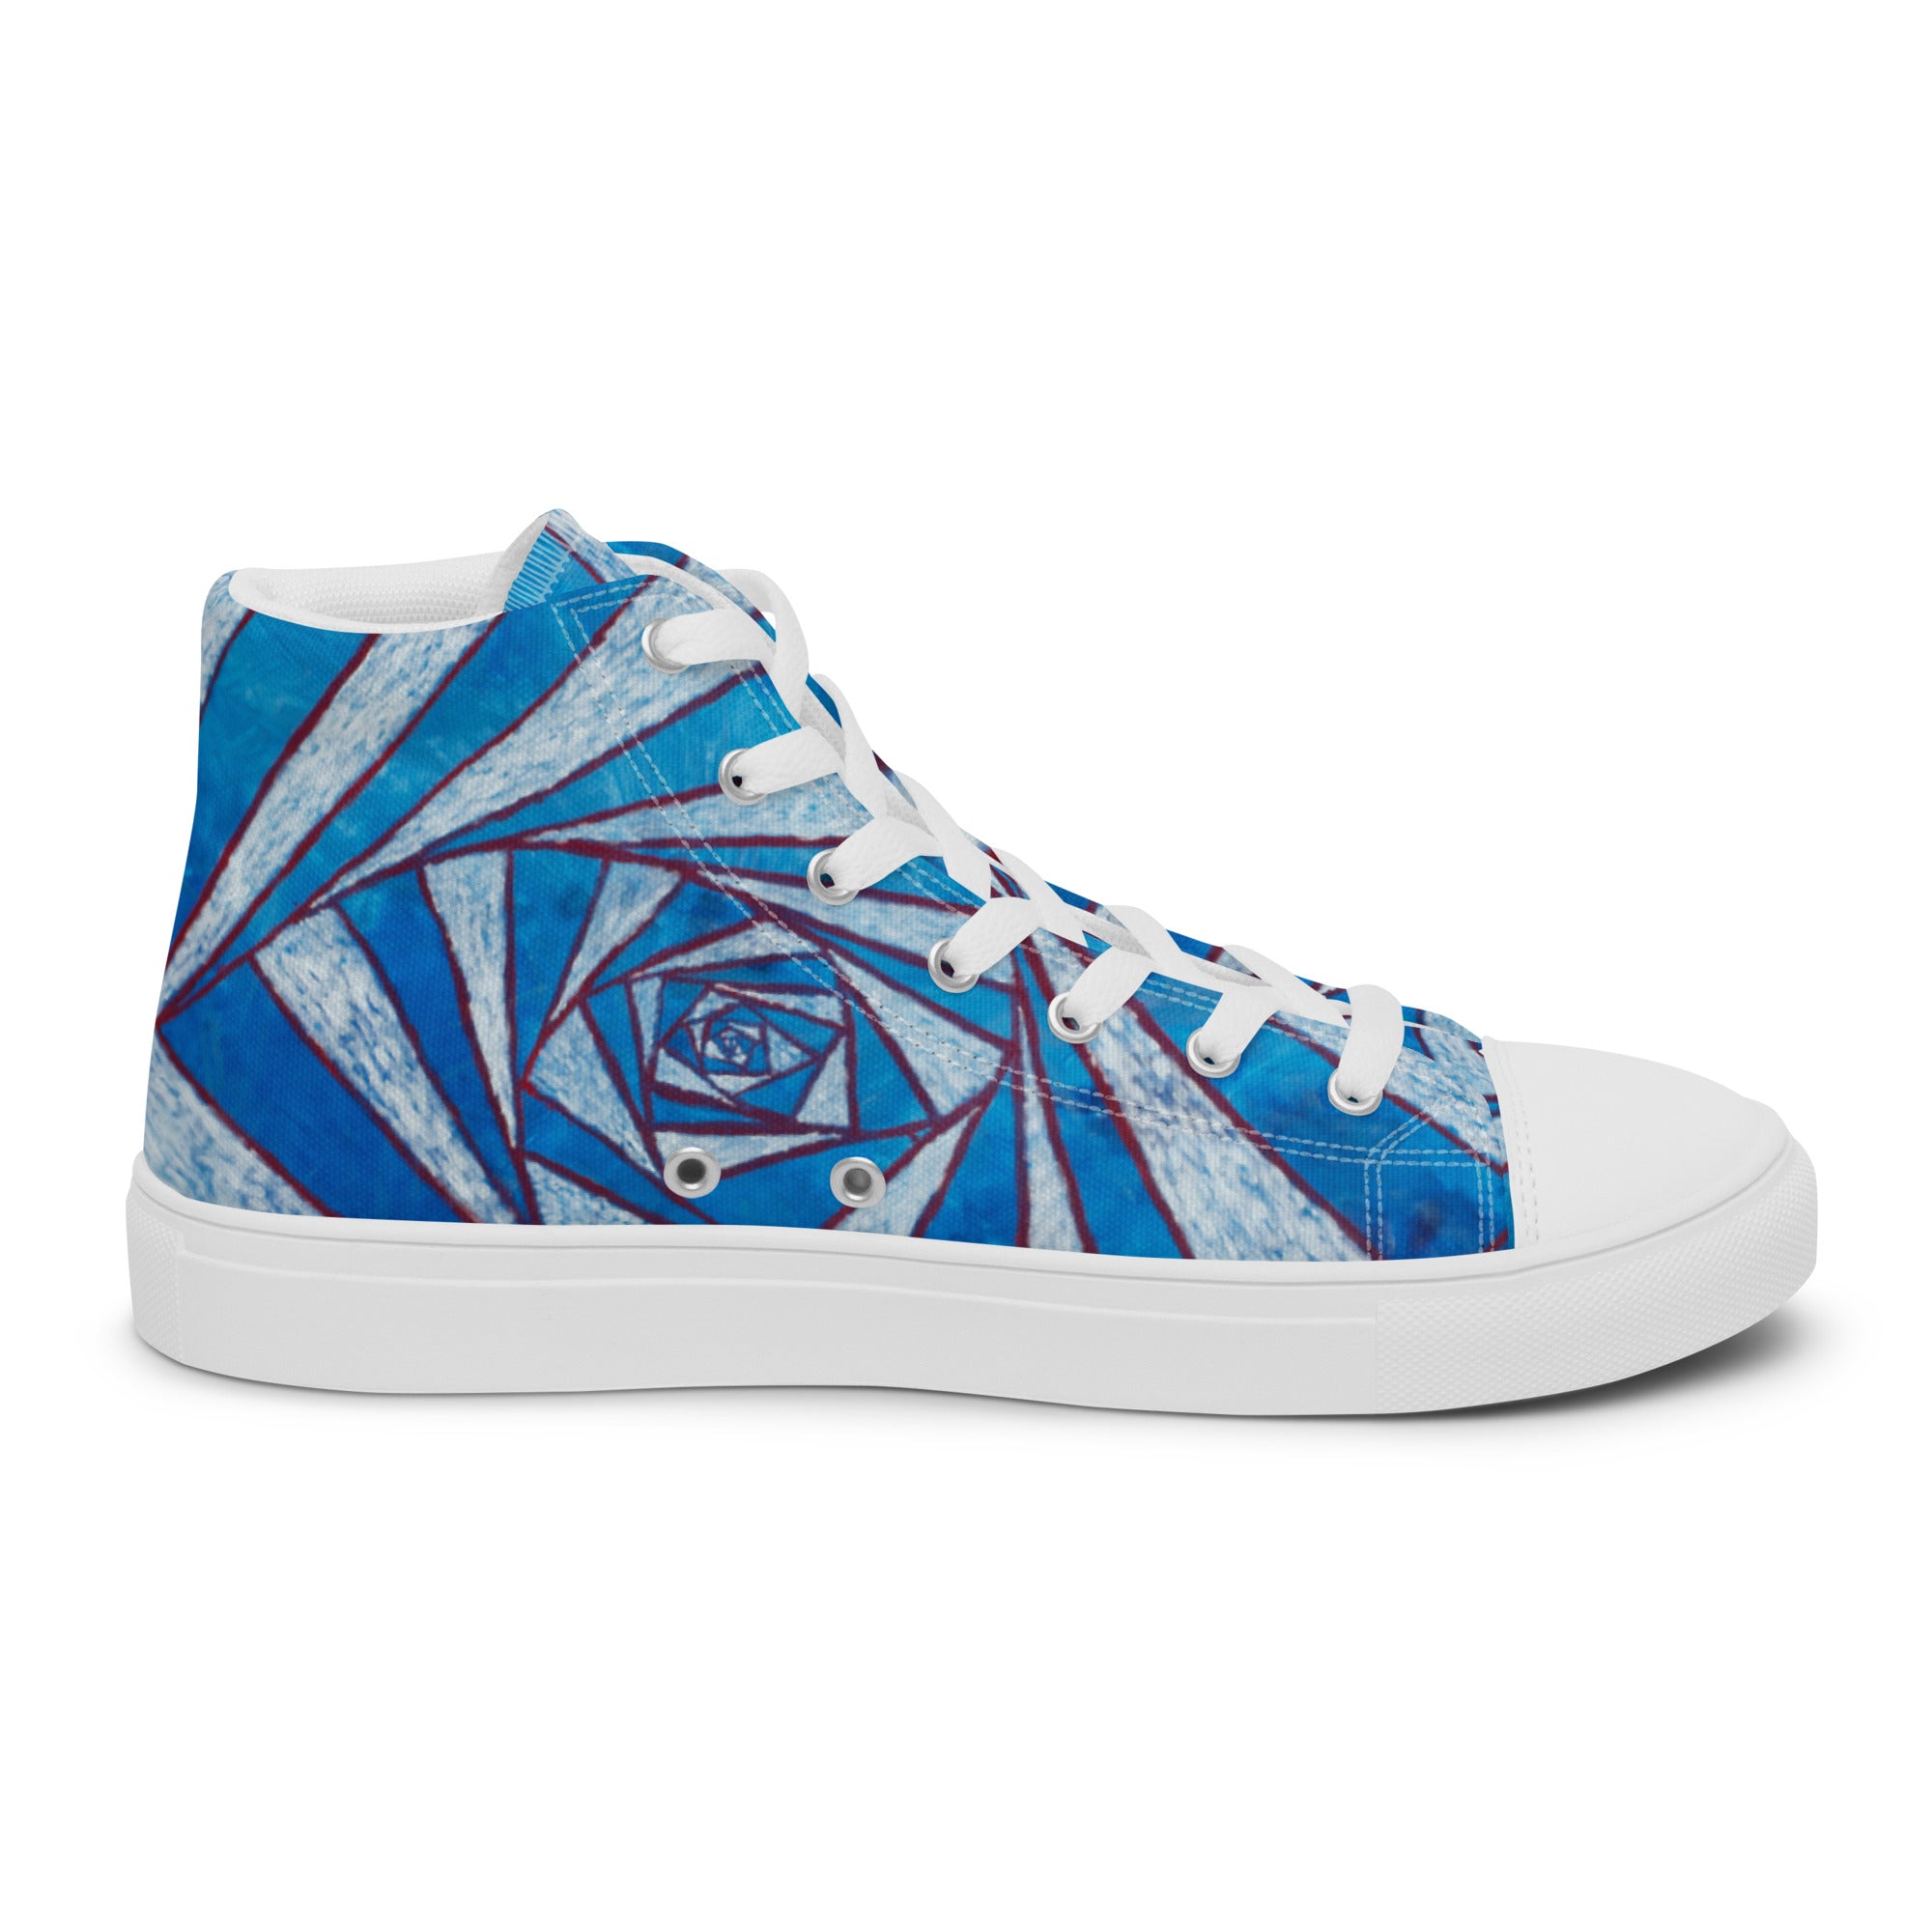 Spiraling out of control Men’s high top canvas shoes